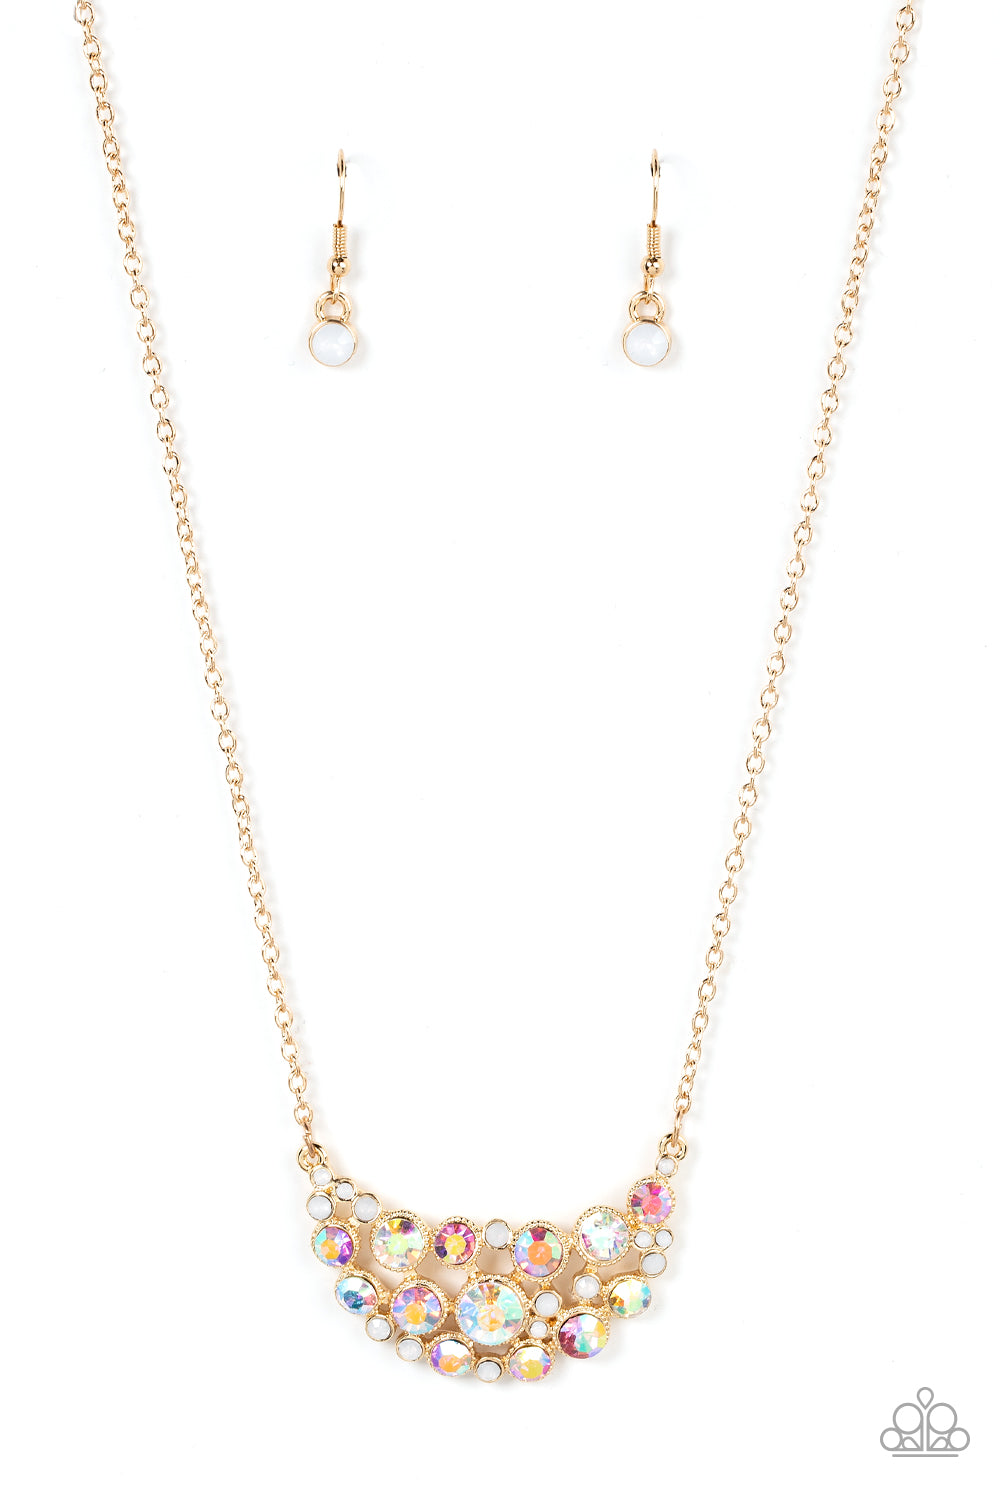 An effervescent collection of opal and iridescent rhinestones delicately join into a bubbly half moon pendant at the bottom of a dainty gold chain, resulting in a sparkly statement piece below the collar. Features an adjustable clasp closure. 